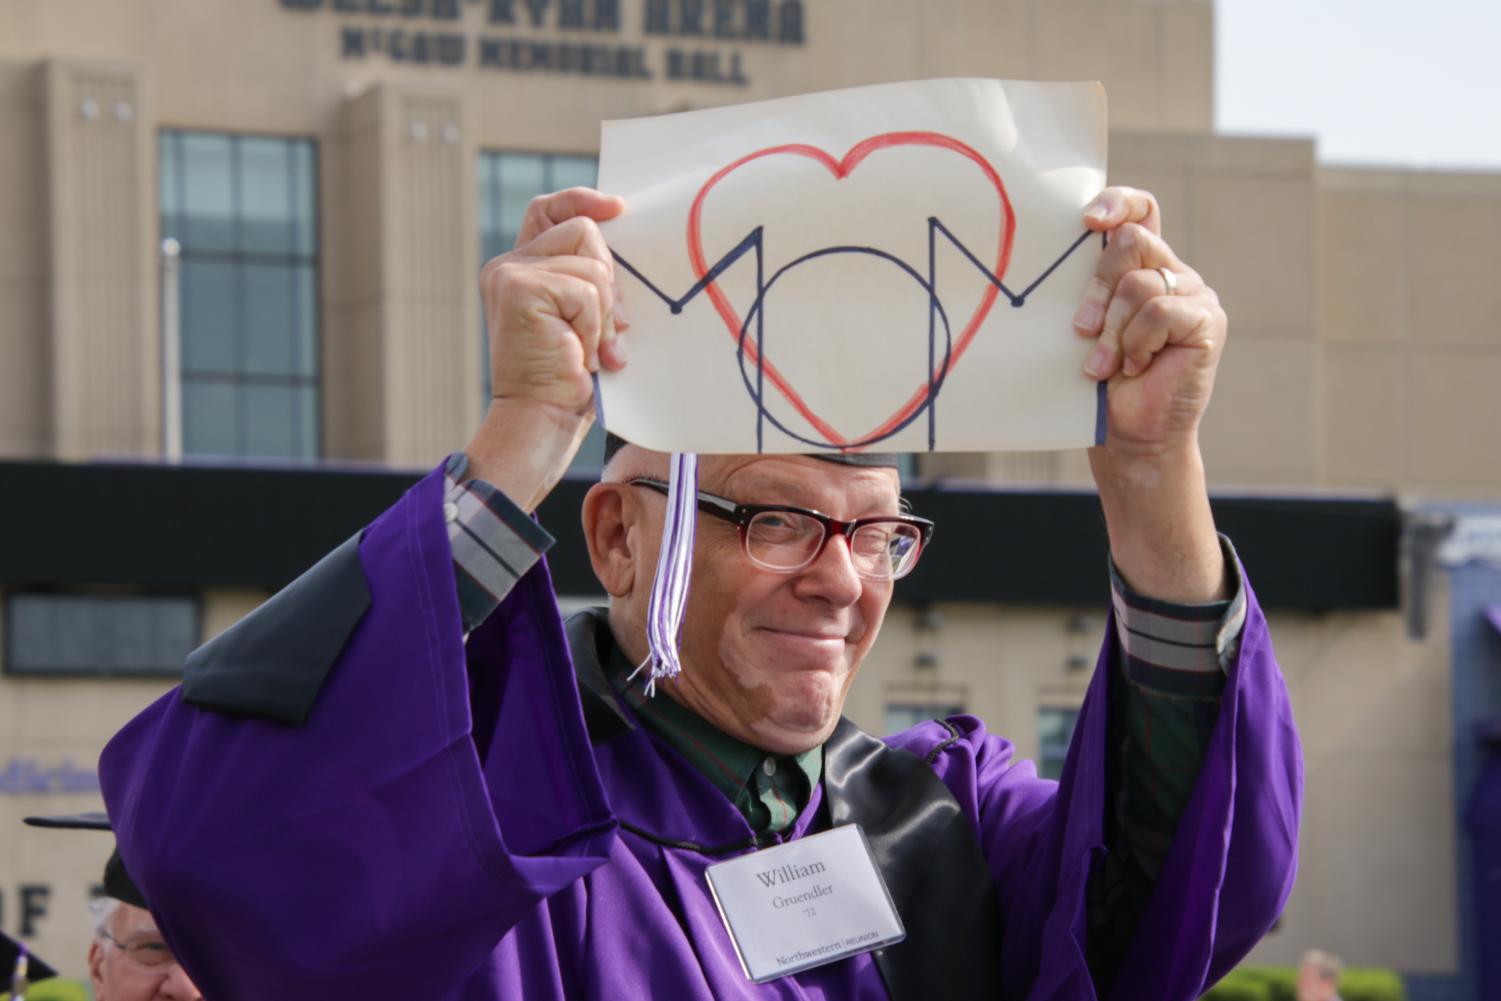 A person in a purple gown holds up a white sign with a red heart and black lines.